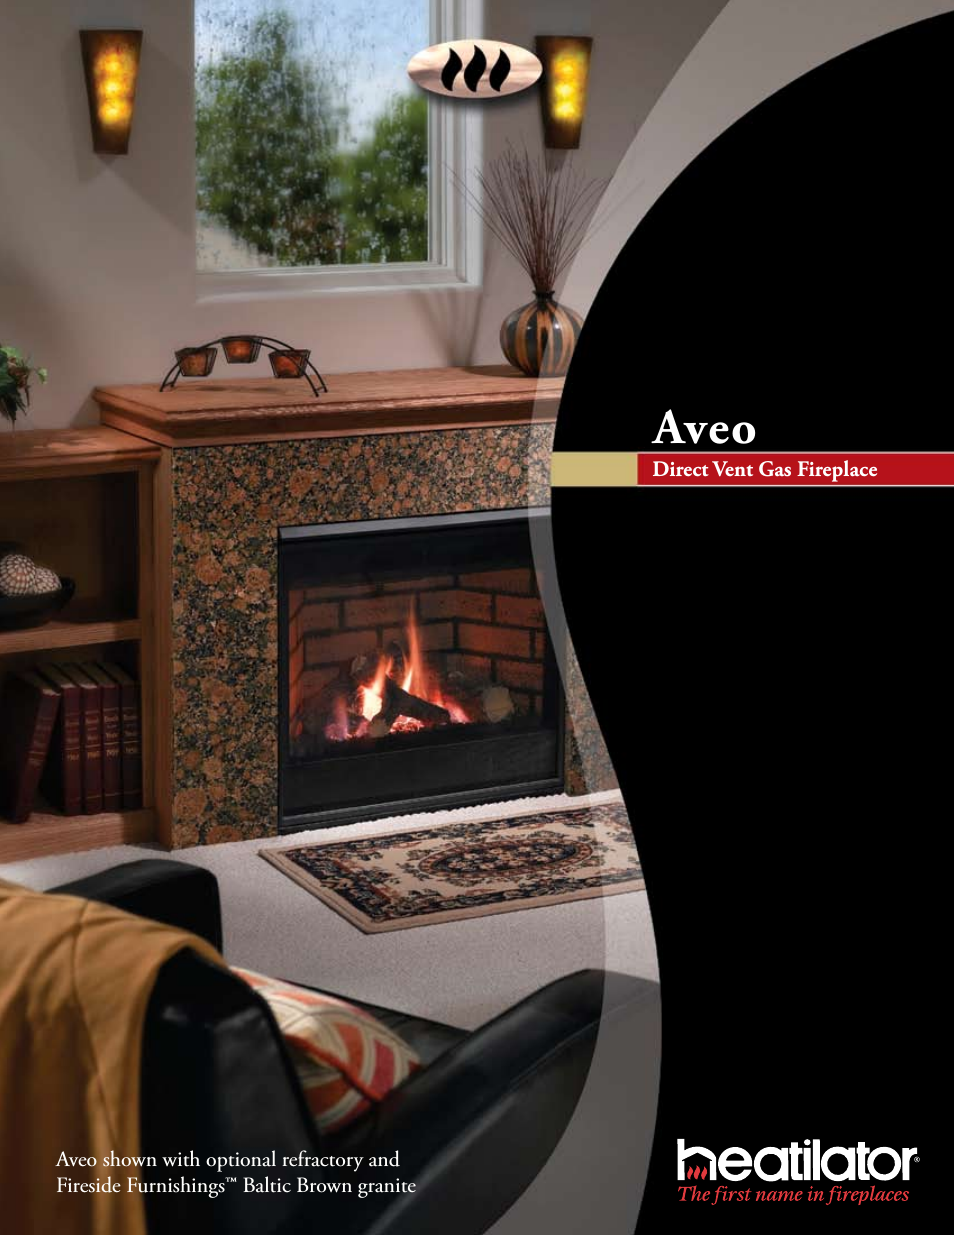 Direct Vent Gas Fireplace Aveo